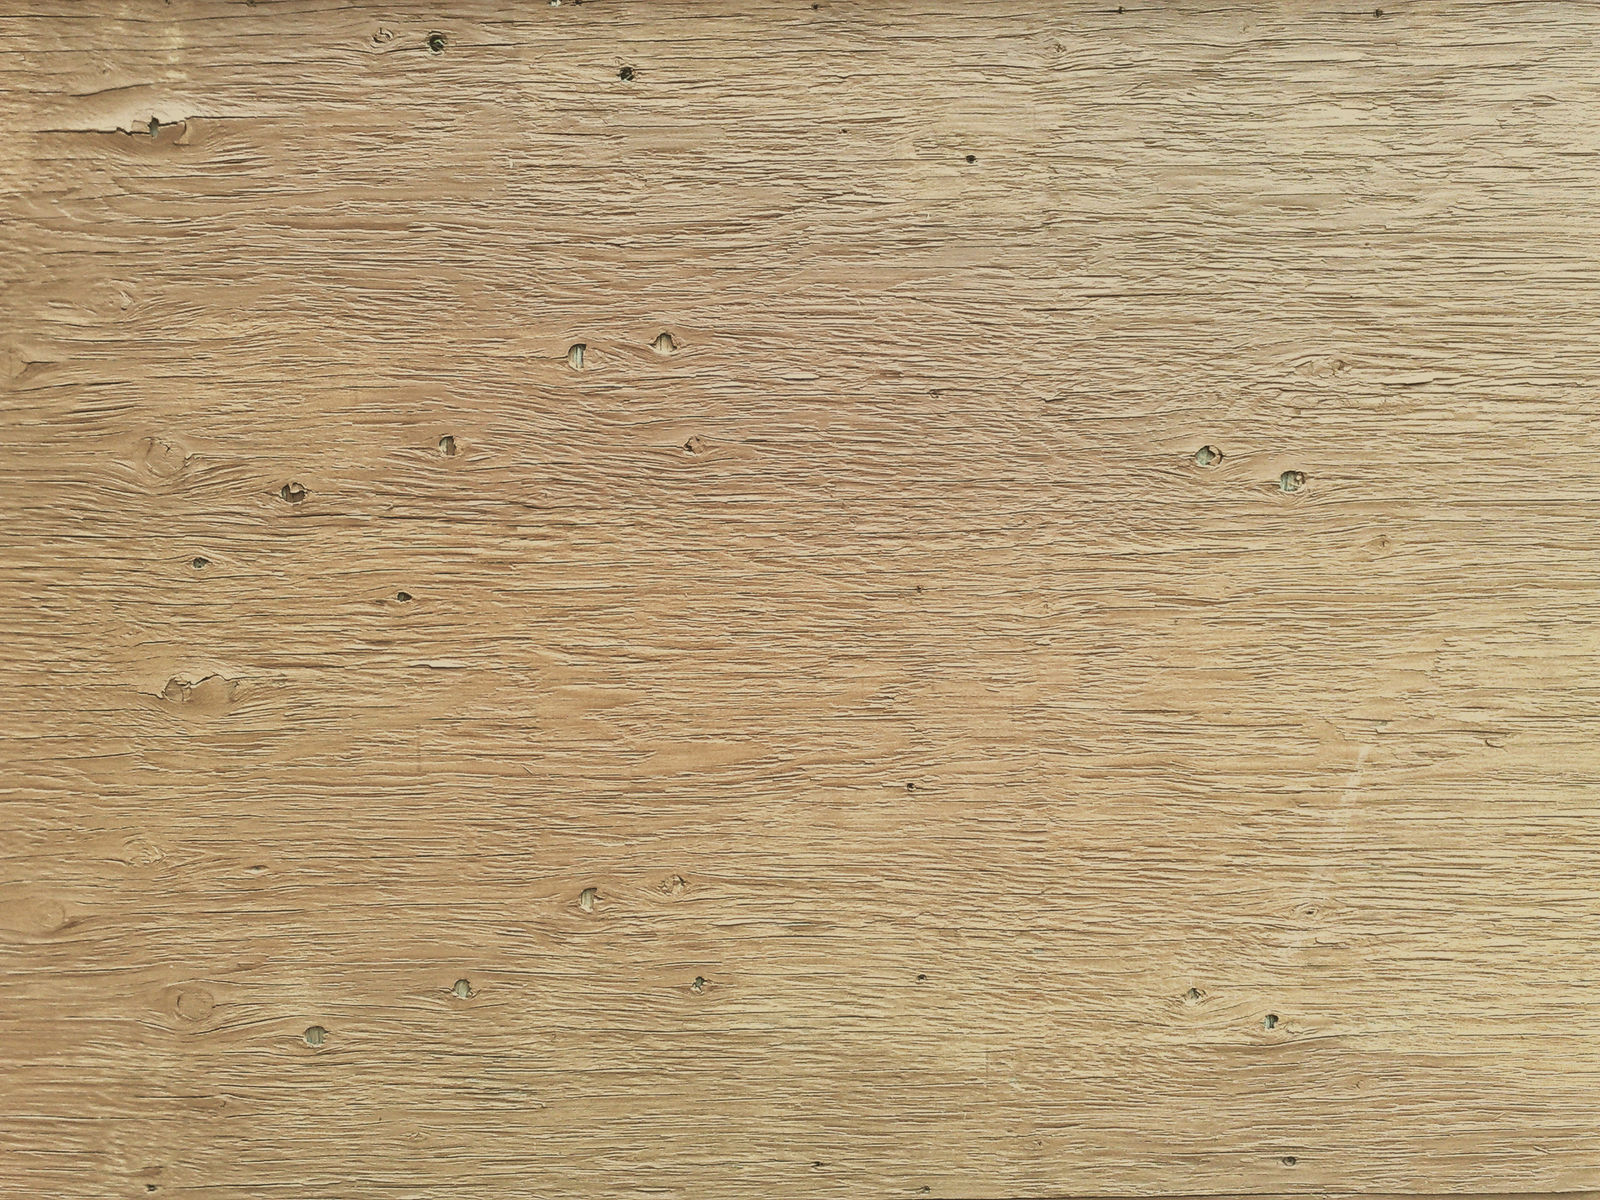 Plywood texture 5051 w/ tiling version